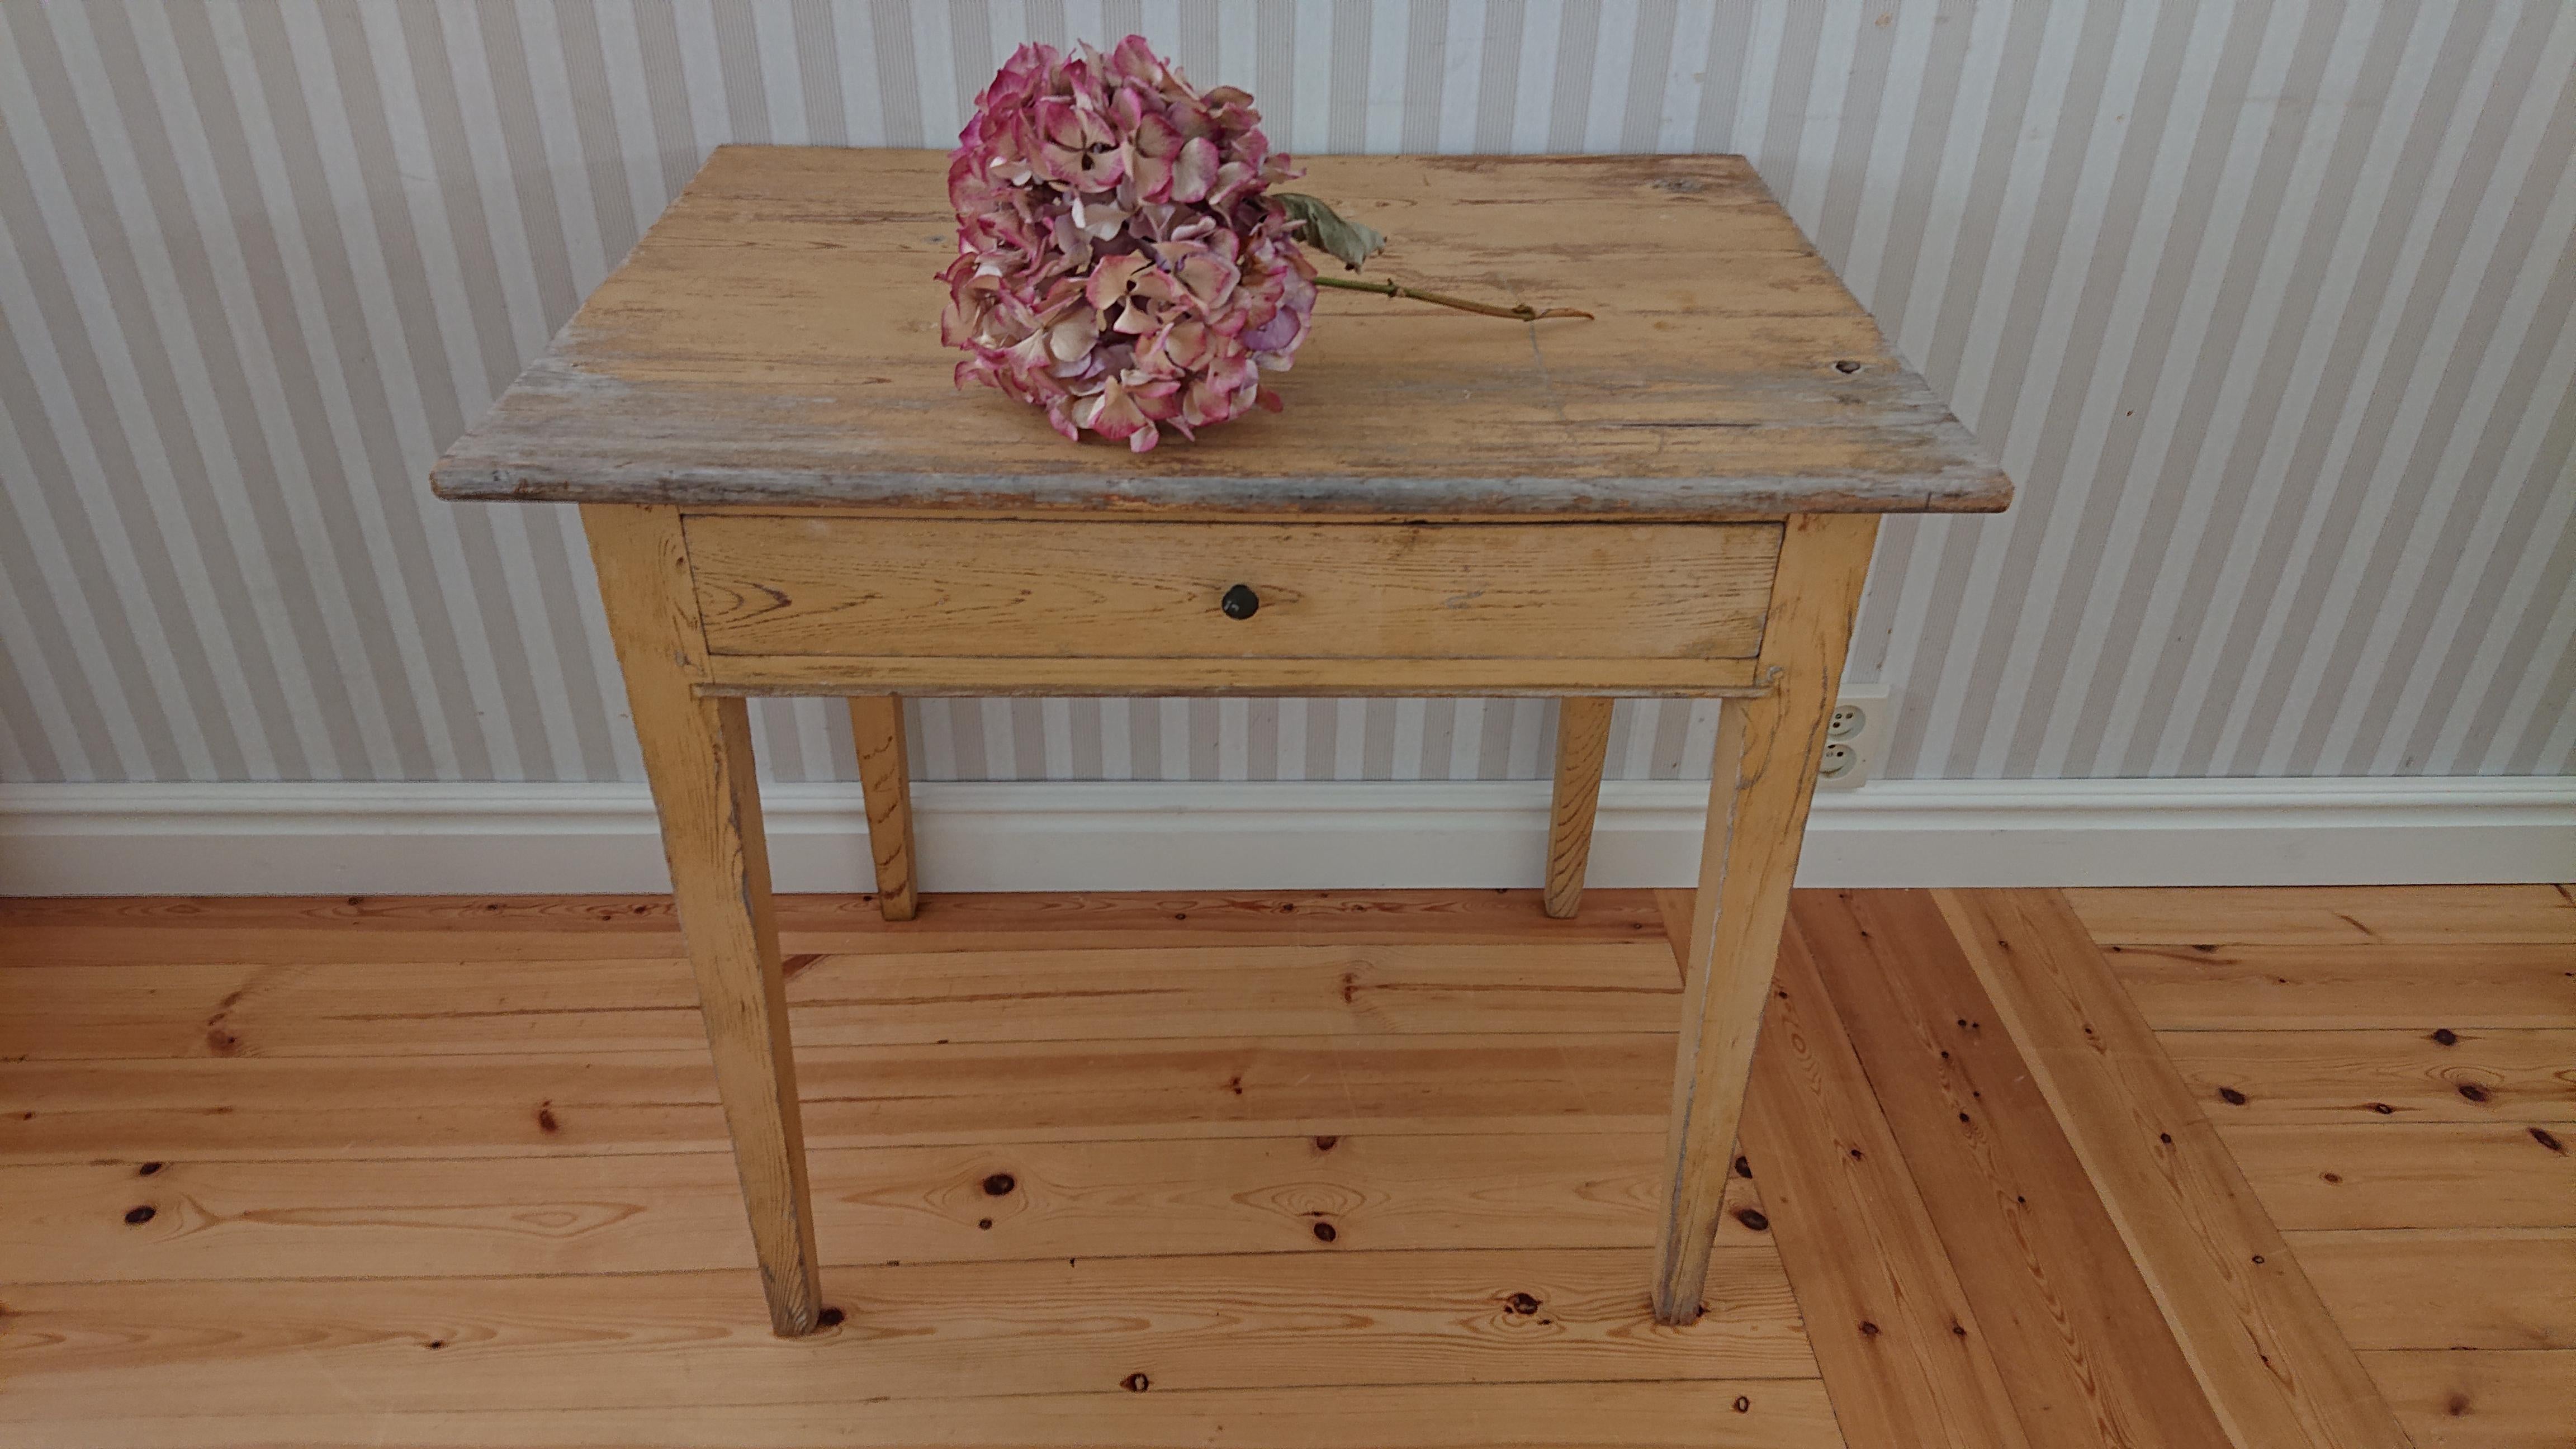 19th century Swedish antique Gustavian table with original paint from Örnsköldsvik Ångermanland, Northern Sweden
This table is raised upon four square legs which gently taper towards their feet.
The table has nicely aged patina.
This 19th century